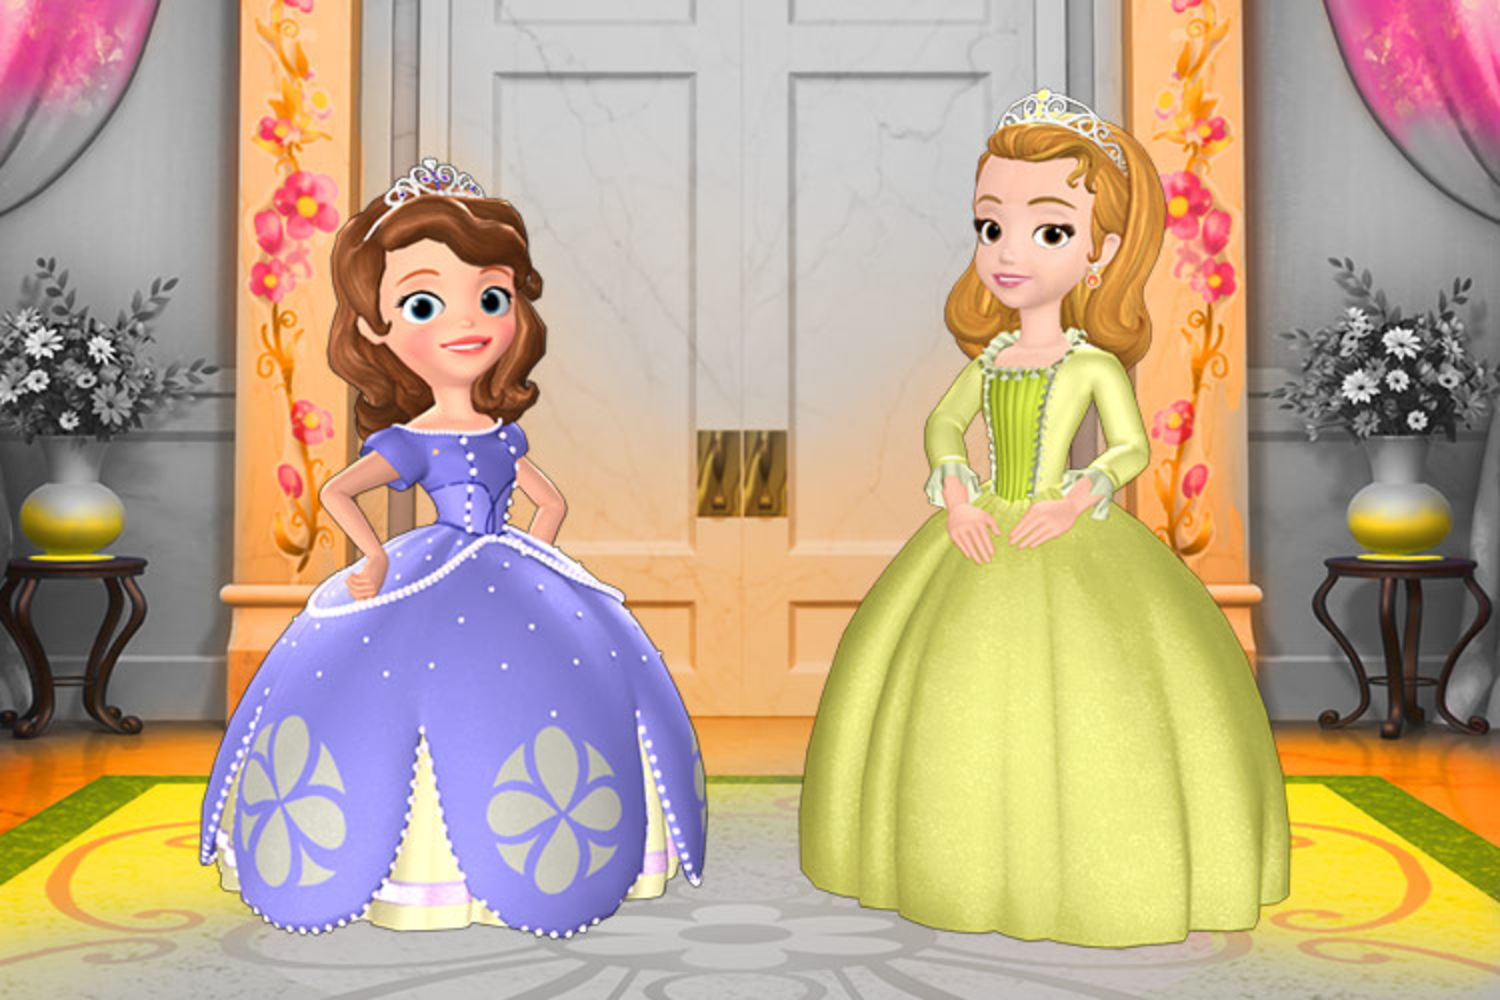 Sofia the First Curse of Princess Ivy Game Character Select Screenshot.